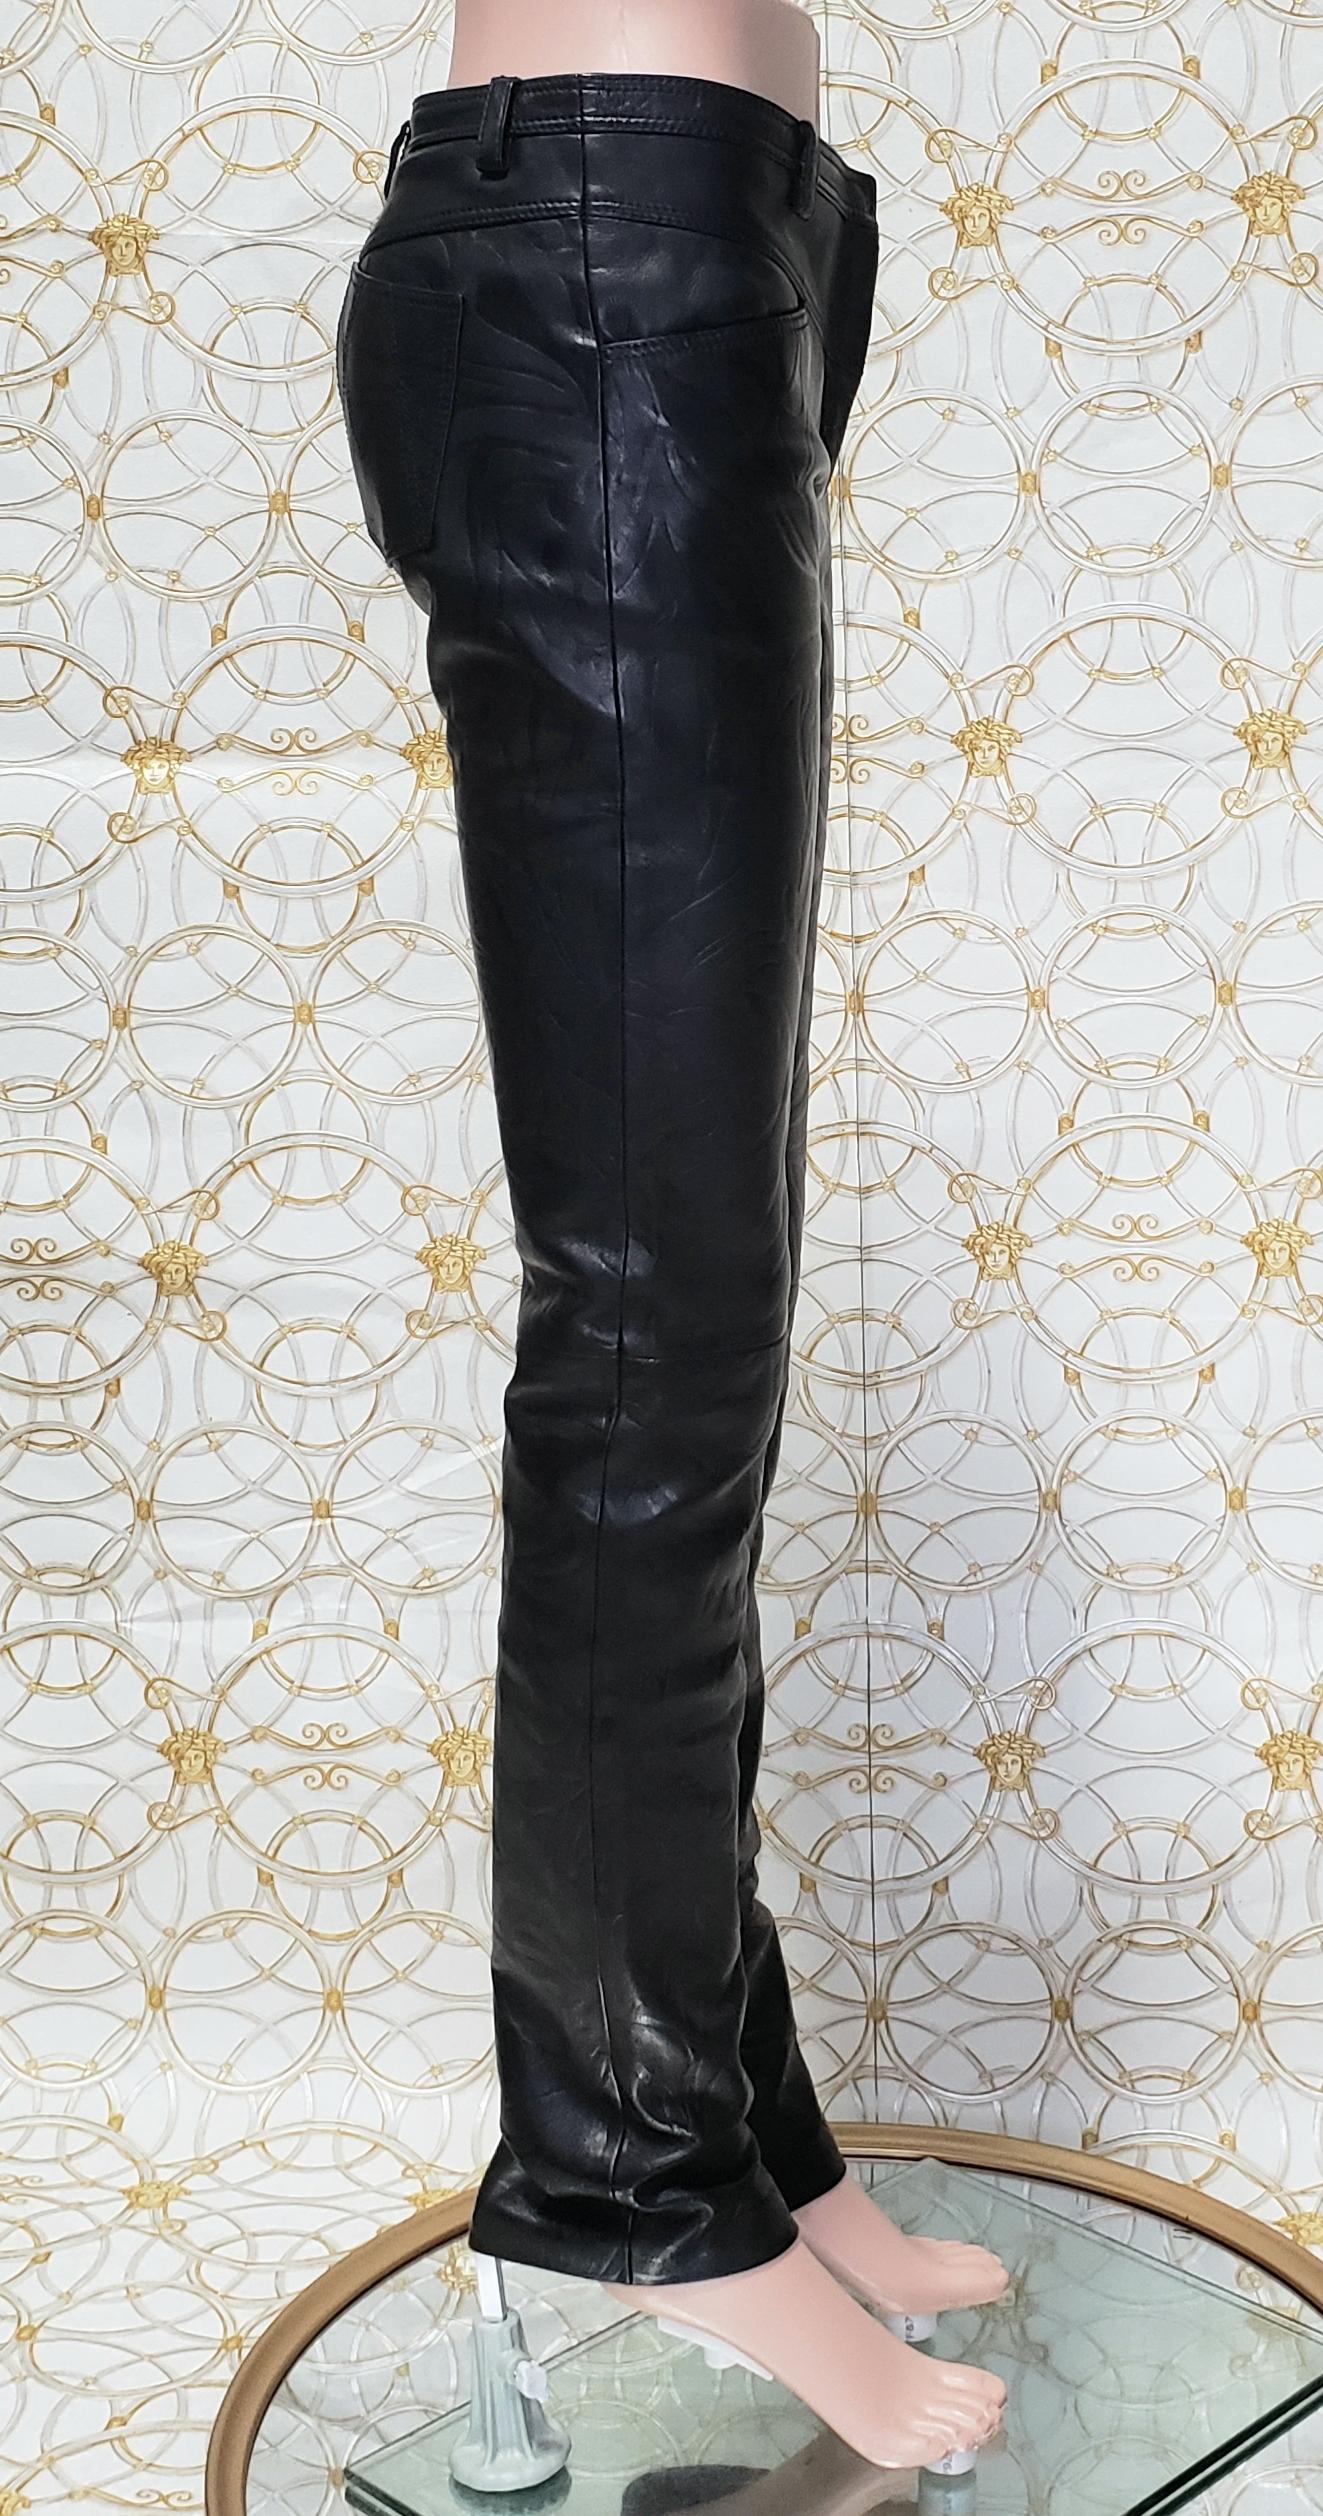 S/S 2014 Look # 35 VERSACE BLACK LEATHER FLORAL PRINT PANTS size 38 - 2 In New Condition For Sale In Montgomery, TX